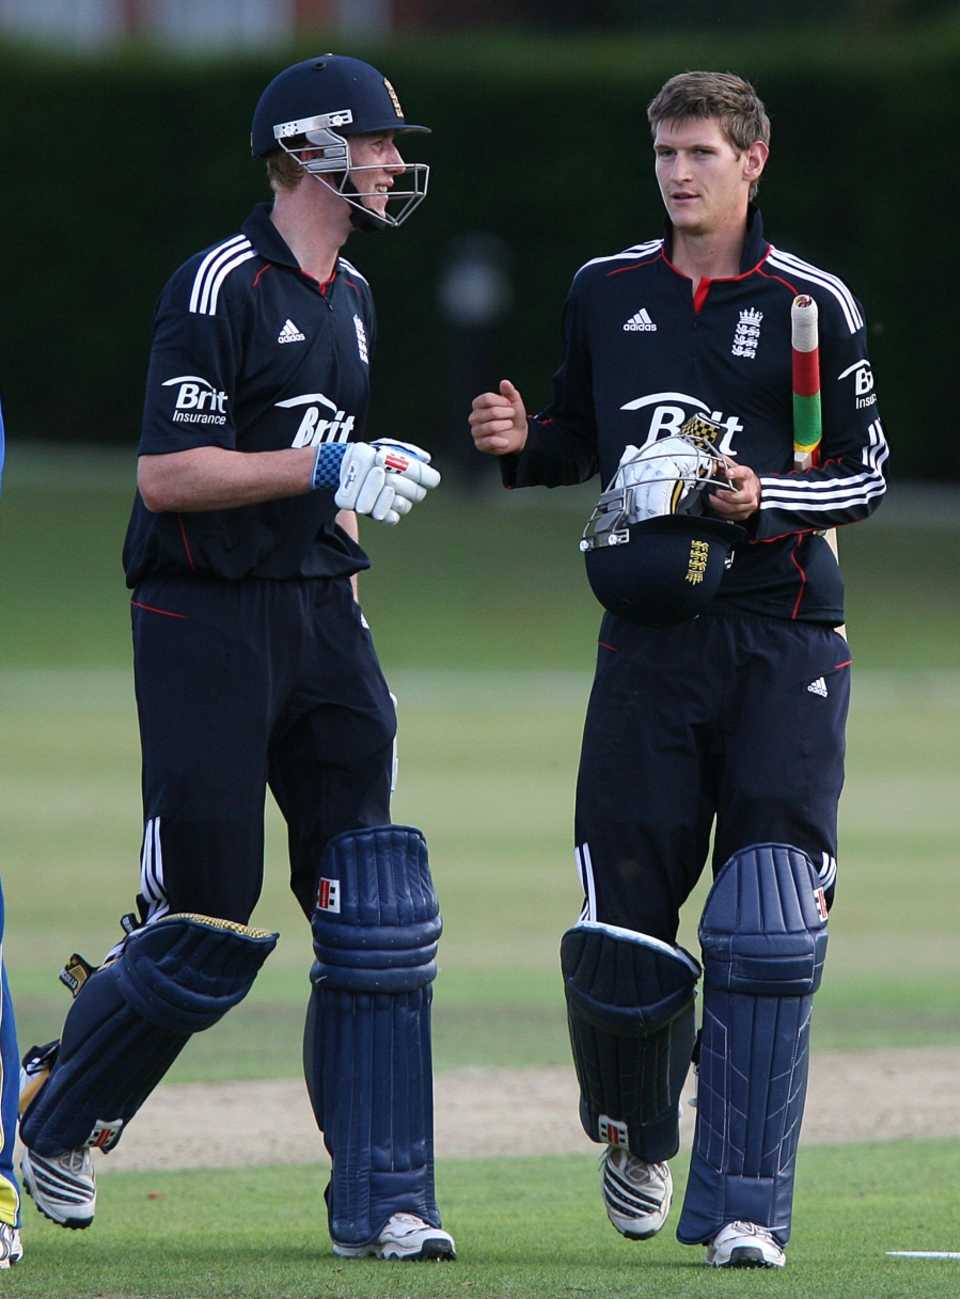 David Payne and Luke Wells sealed a tense, three-wicket win in the final over